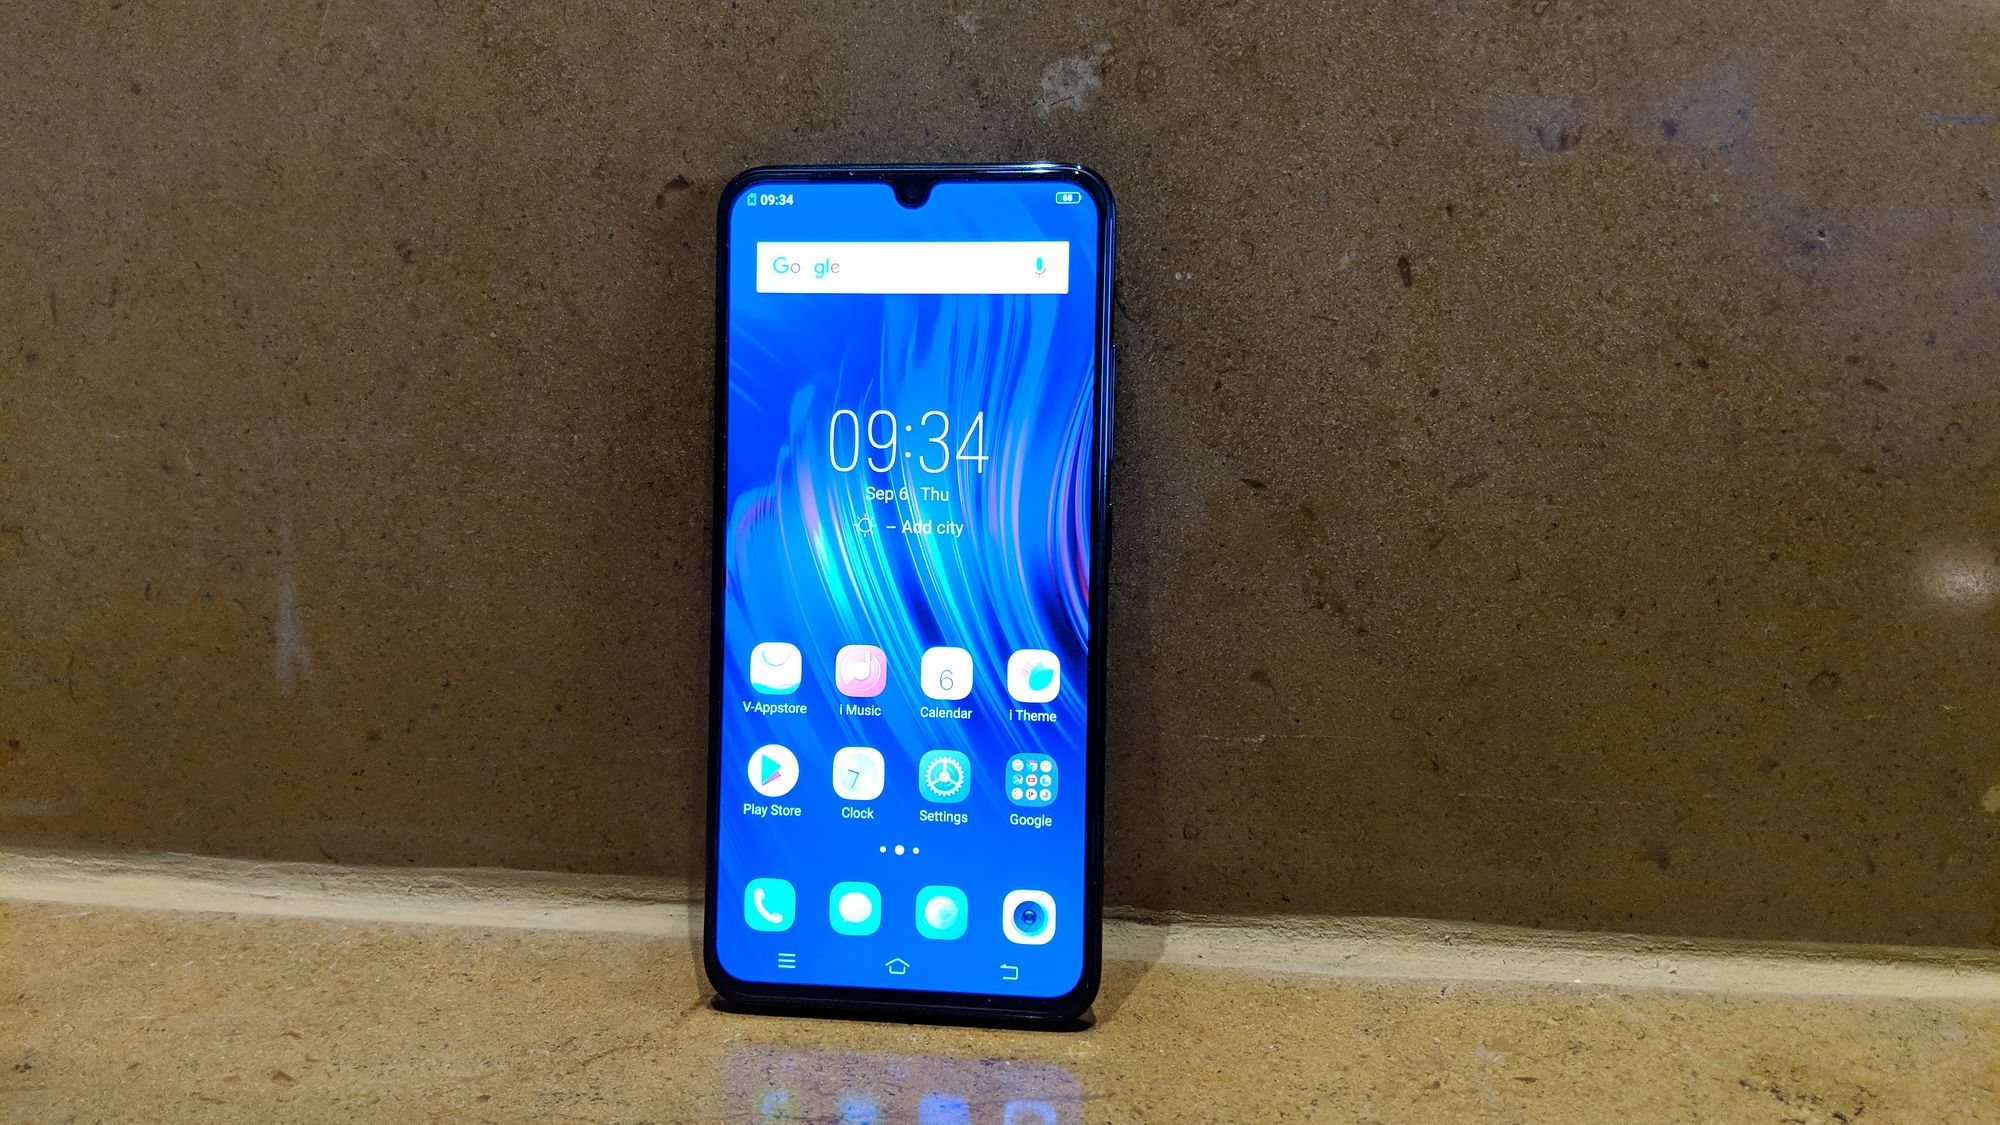 The OnePlus 6T could get a water drop notch like the one we saw on Vivo V11 Pro.